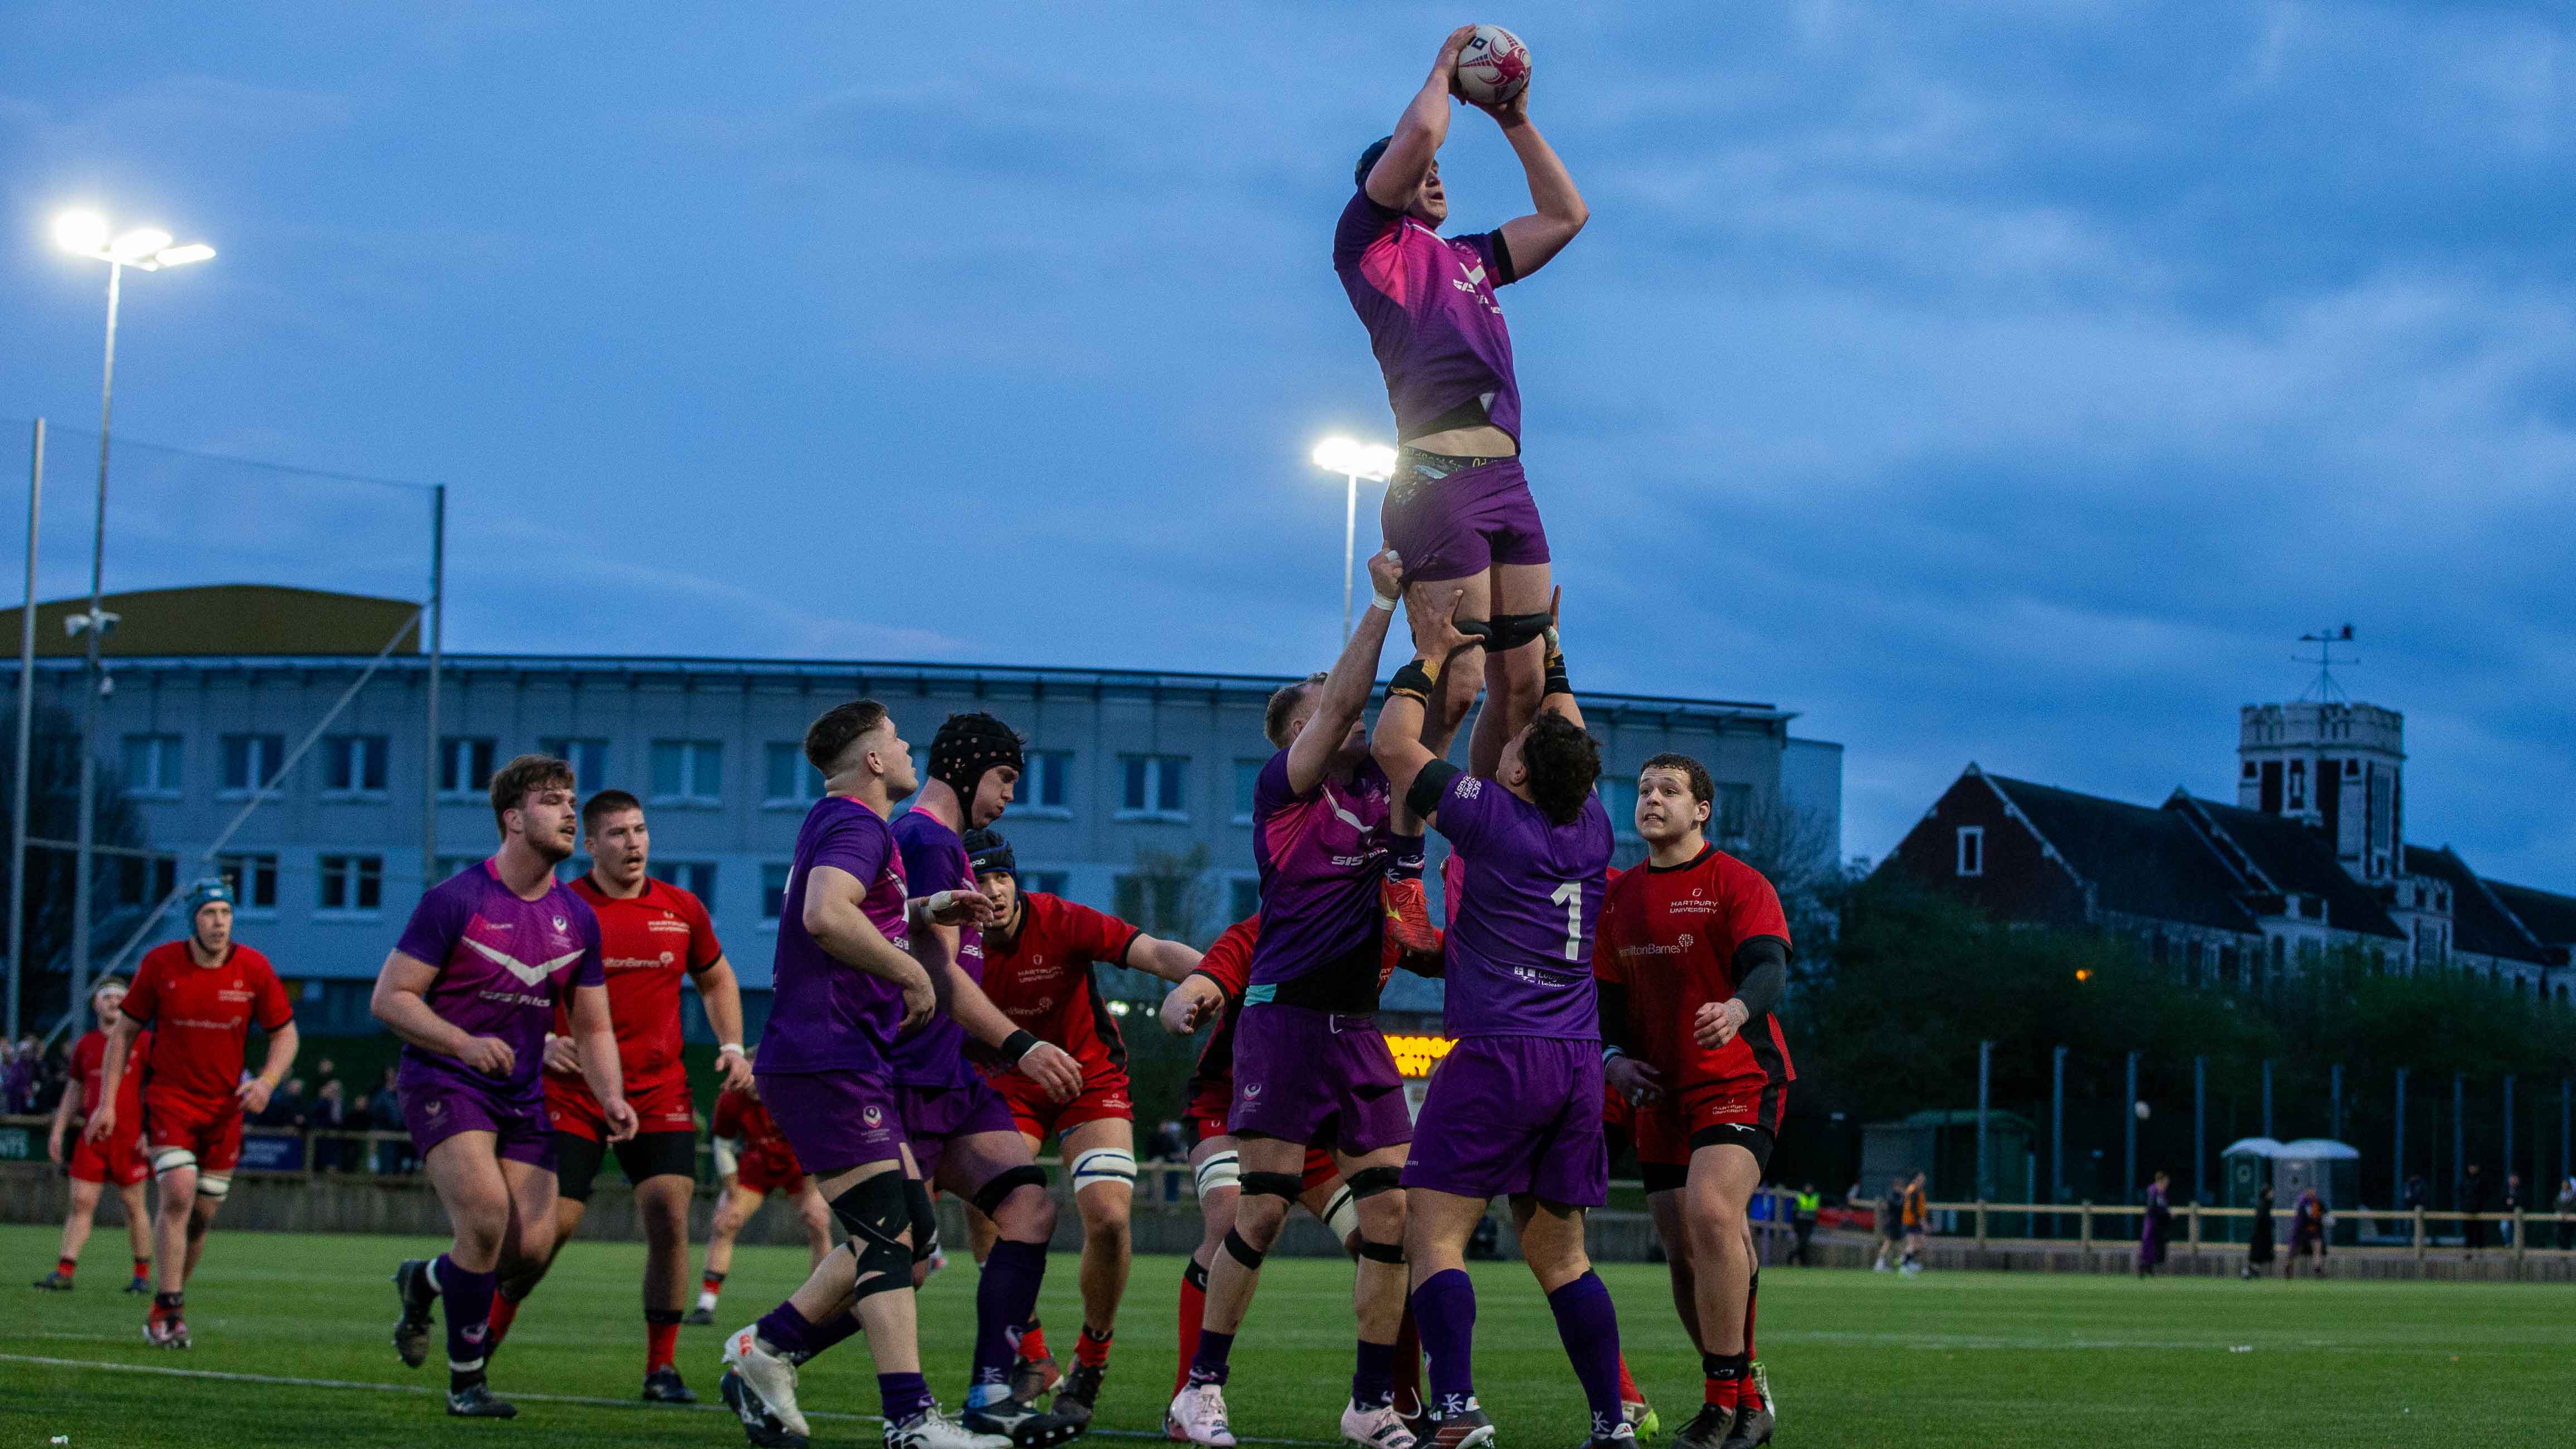 Loughborough students Rugby playing Hartpury University